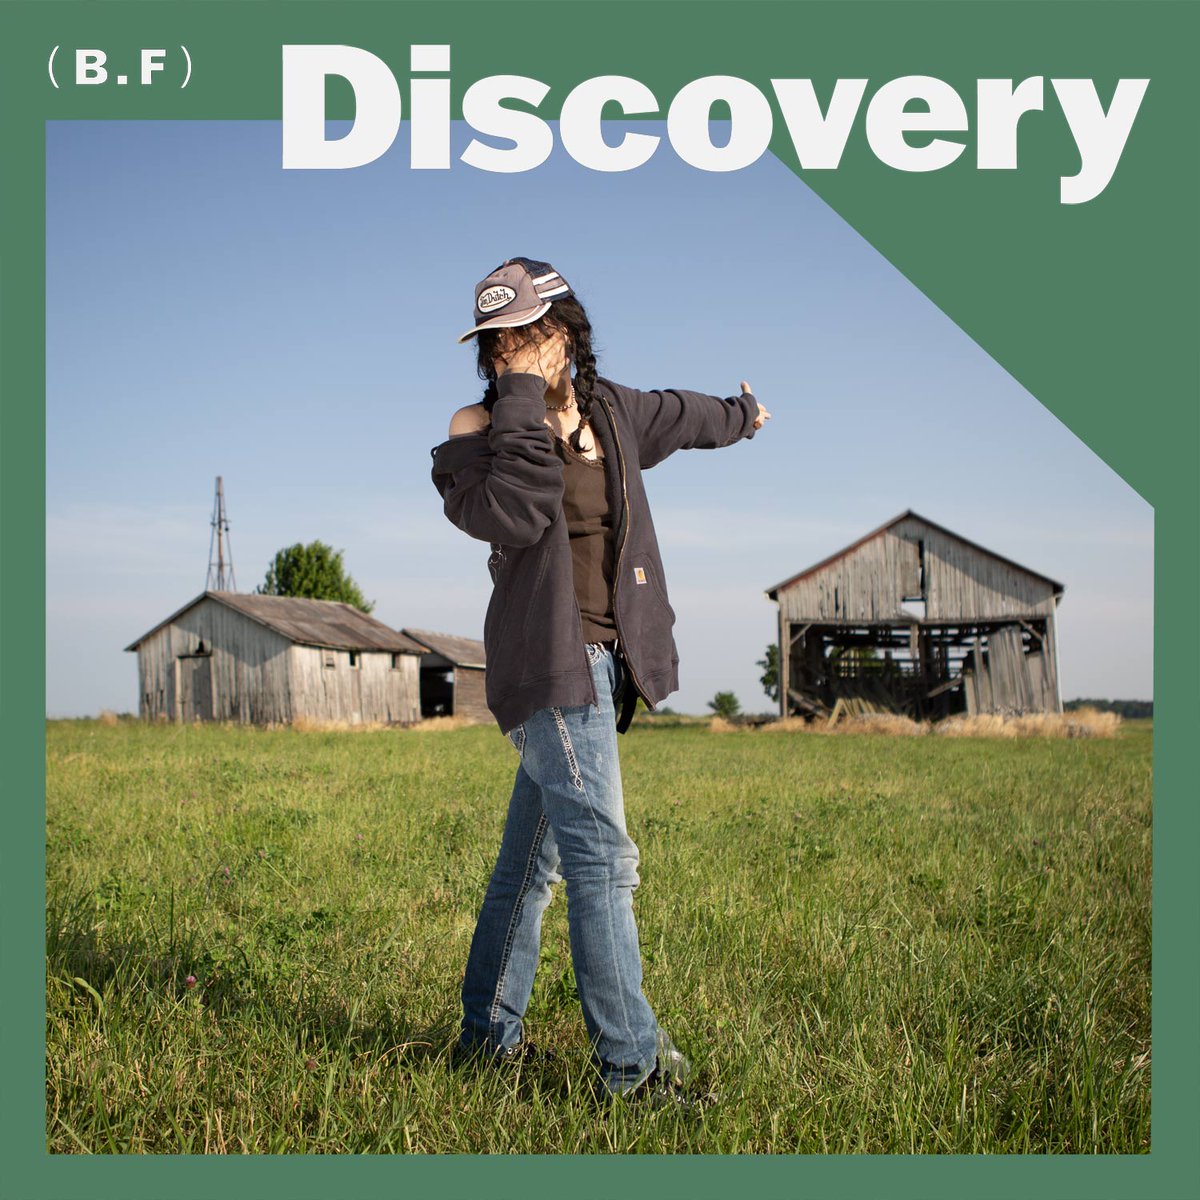 Stream the songs from the last 5 days you need to know by following Best Fit's Discovery playlist, feat cover star @underscoresplus + @brenna_miles @itsaziya @Siphotheizm @debbie_ @lunamorgenster1 @LutaloJones @OfficialTamera @RachelBobbitt + more bestf.it/discovery